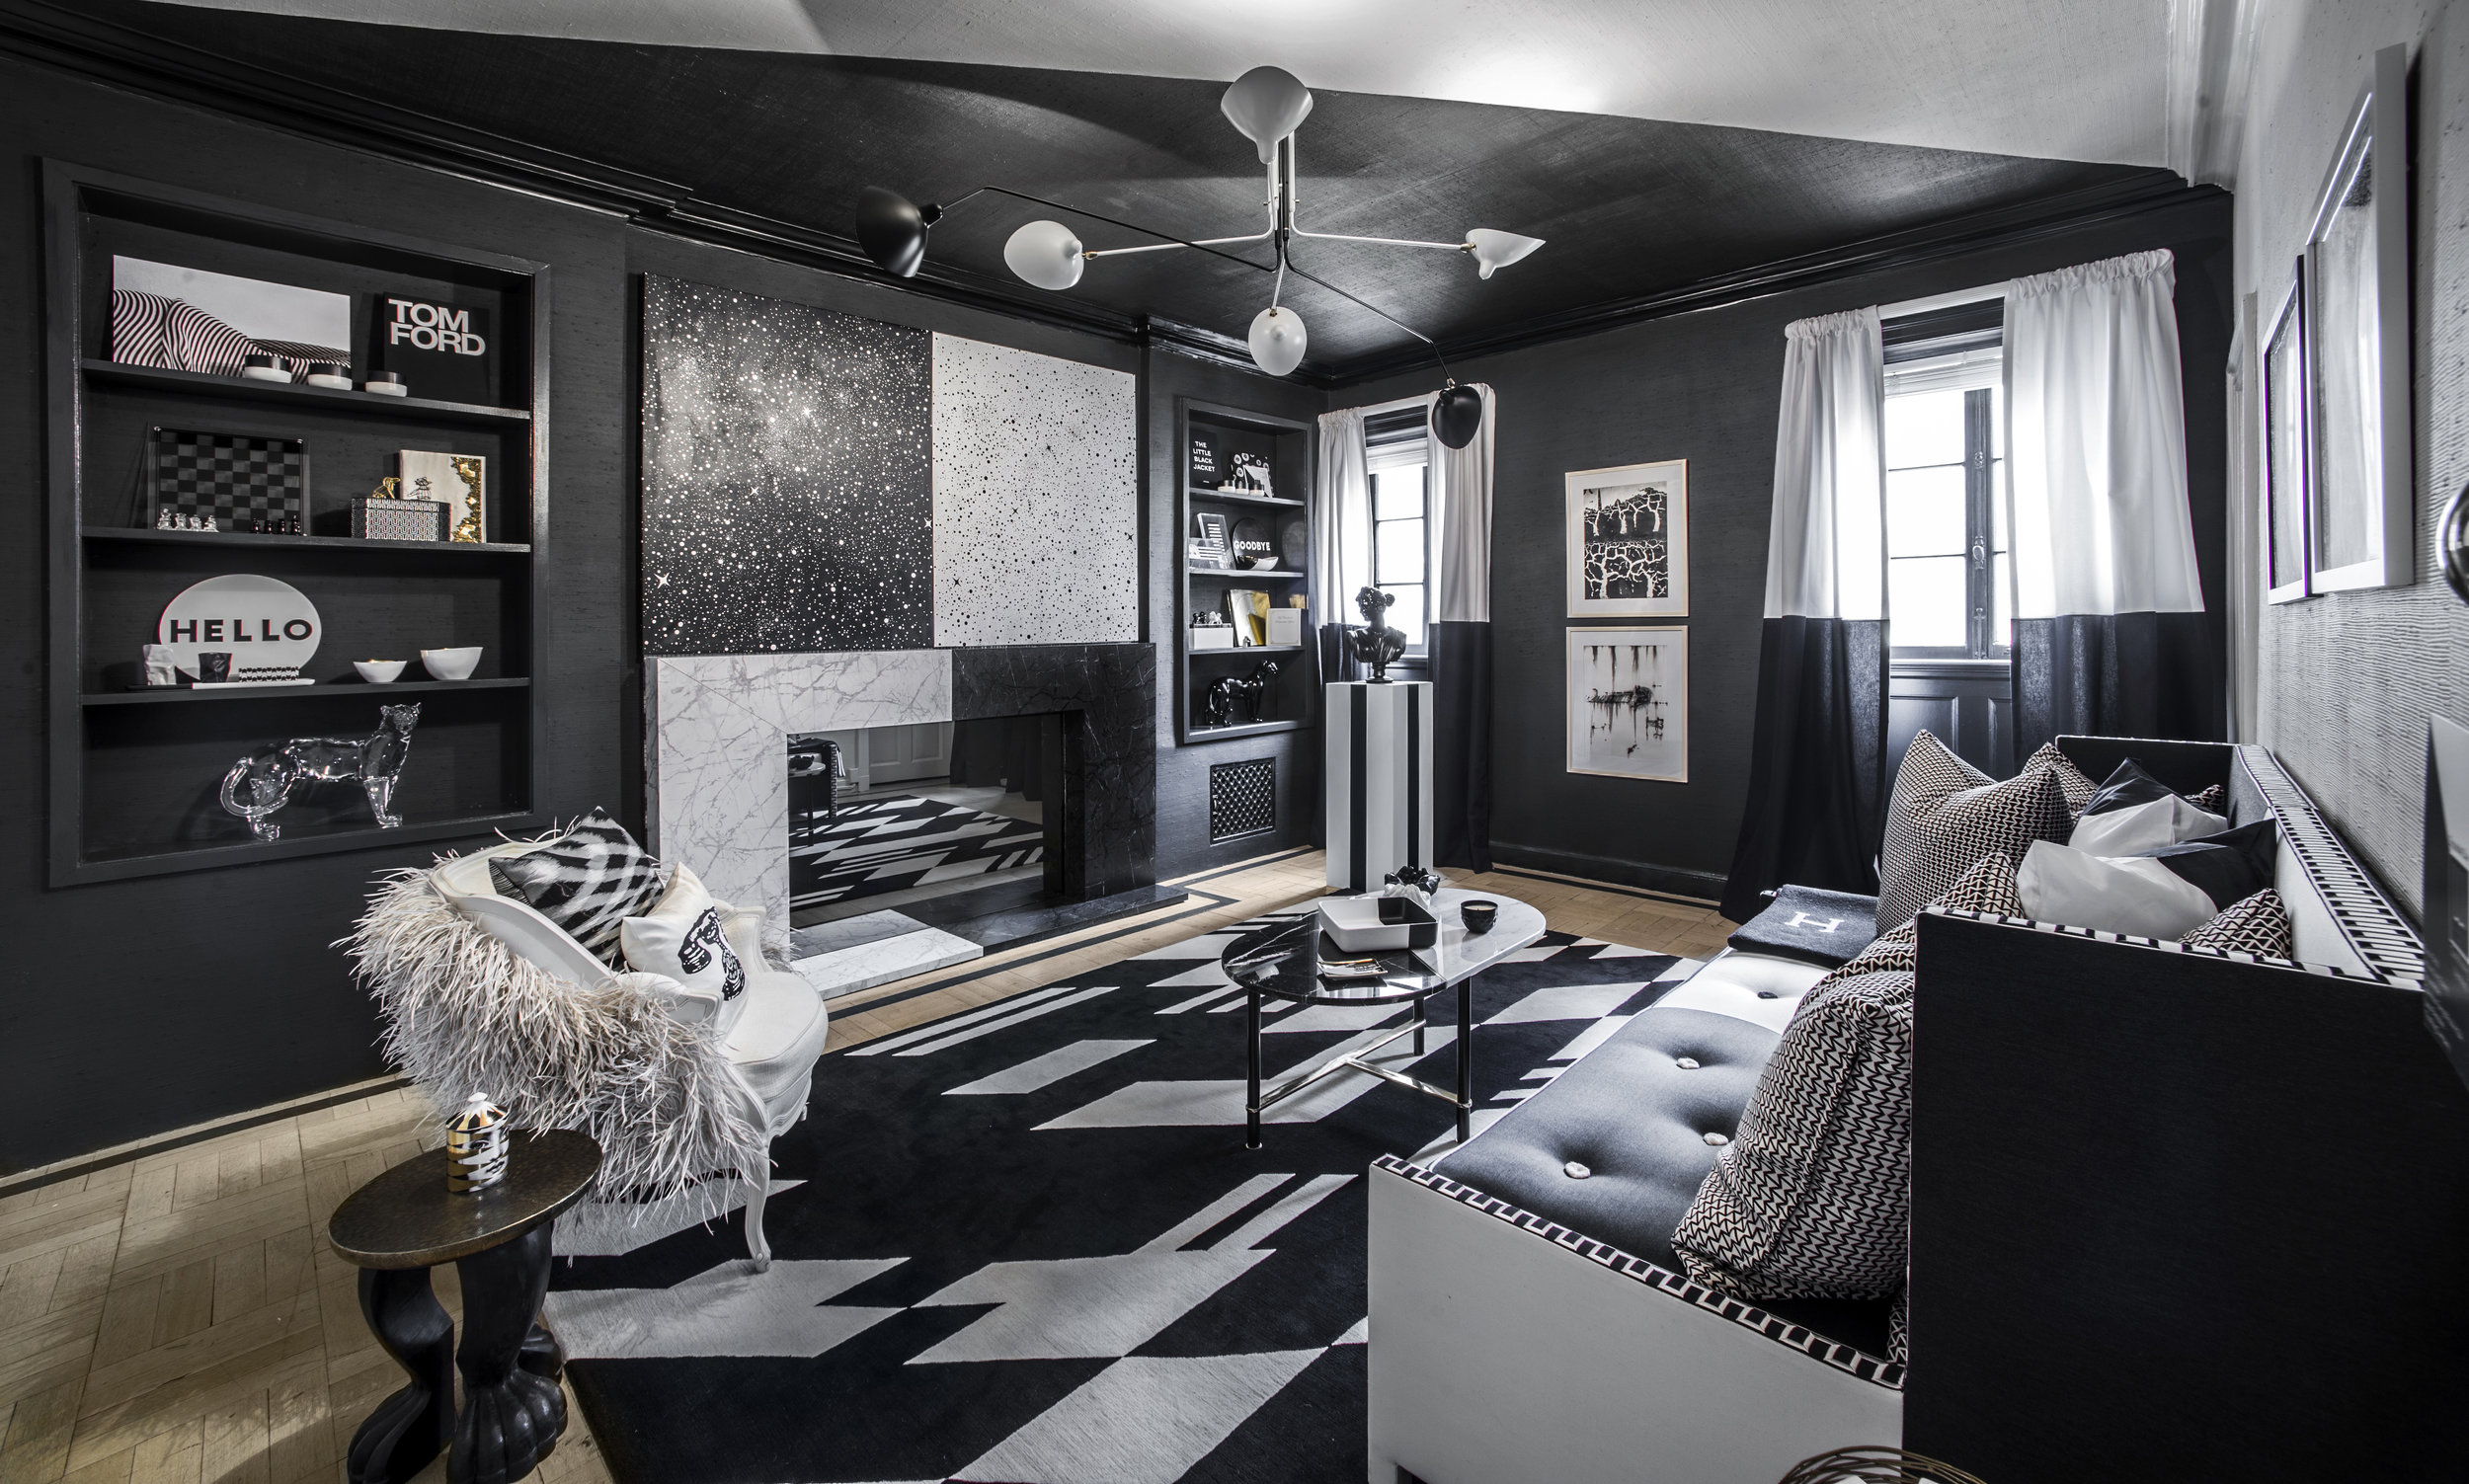 Black and White Room - photo by Andrew Werner.jpg